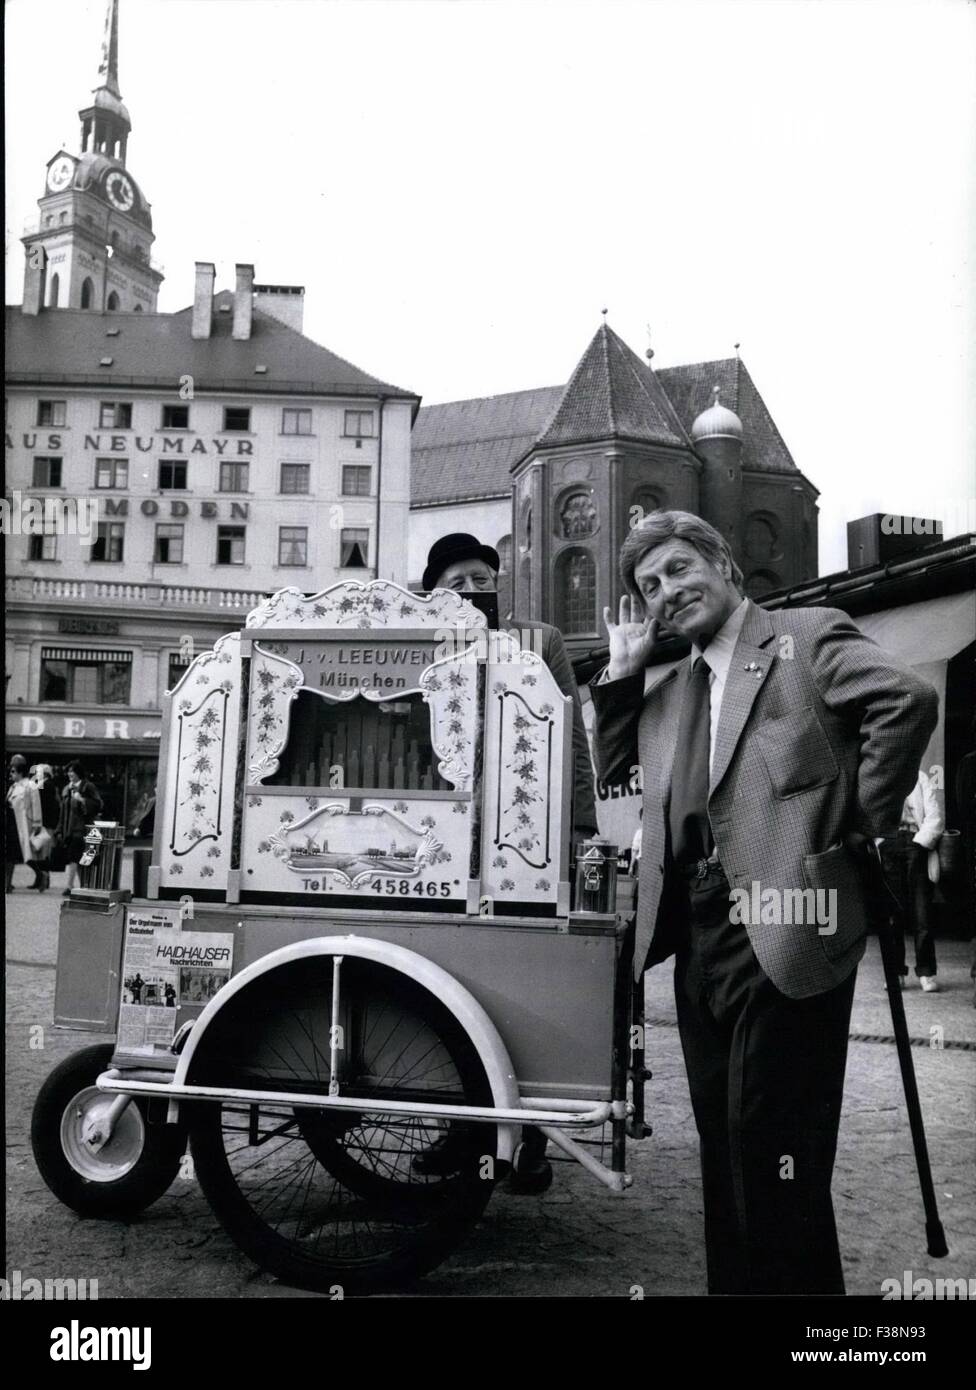 Dec. 21, 1978 - Charlie Rivel Stars In Munich: A promenade over the Viktualienmarkt. is one of the most favorite pleasures Charlie Rivel if he is in Munich (Picture) at the present the 82-year-old world famous clown stars in the Bavarian capital. Every evening he gives a performance of 1 1 /2 hours, and the audience is enthusiastically as at all times. No wonder, that the starring has been prolonges to April 27th. Then Charlie will go to Zurich, Basel and Vienna. In autumn he will come back again wants to be married again. Now he searches for the right woman, it has to be a German, and among Stock Photo